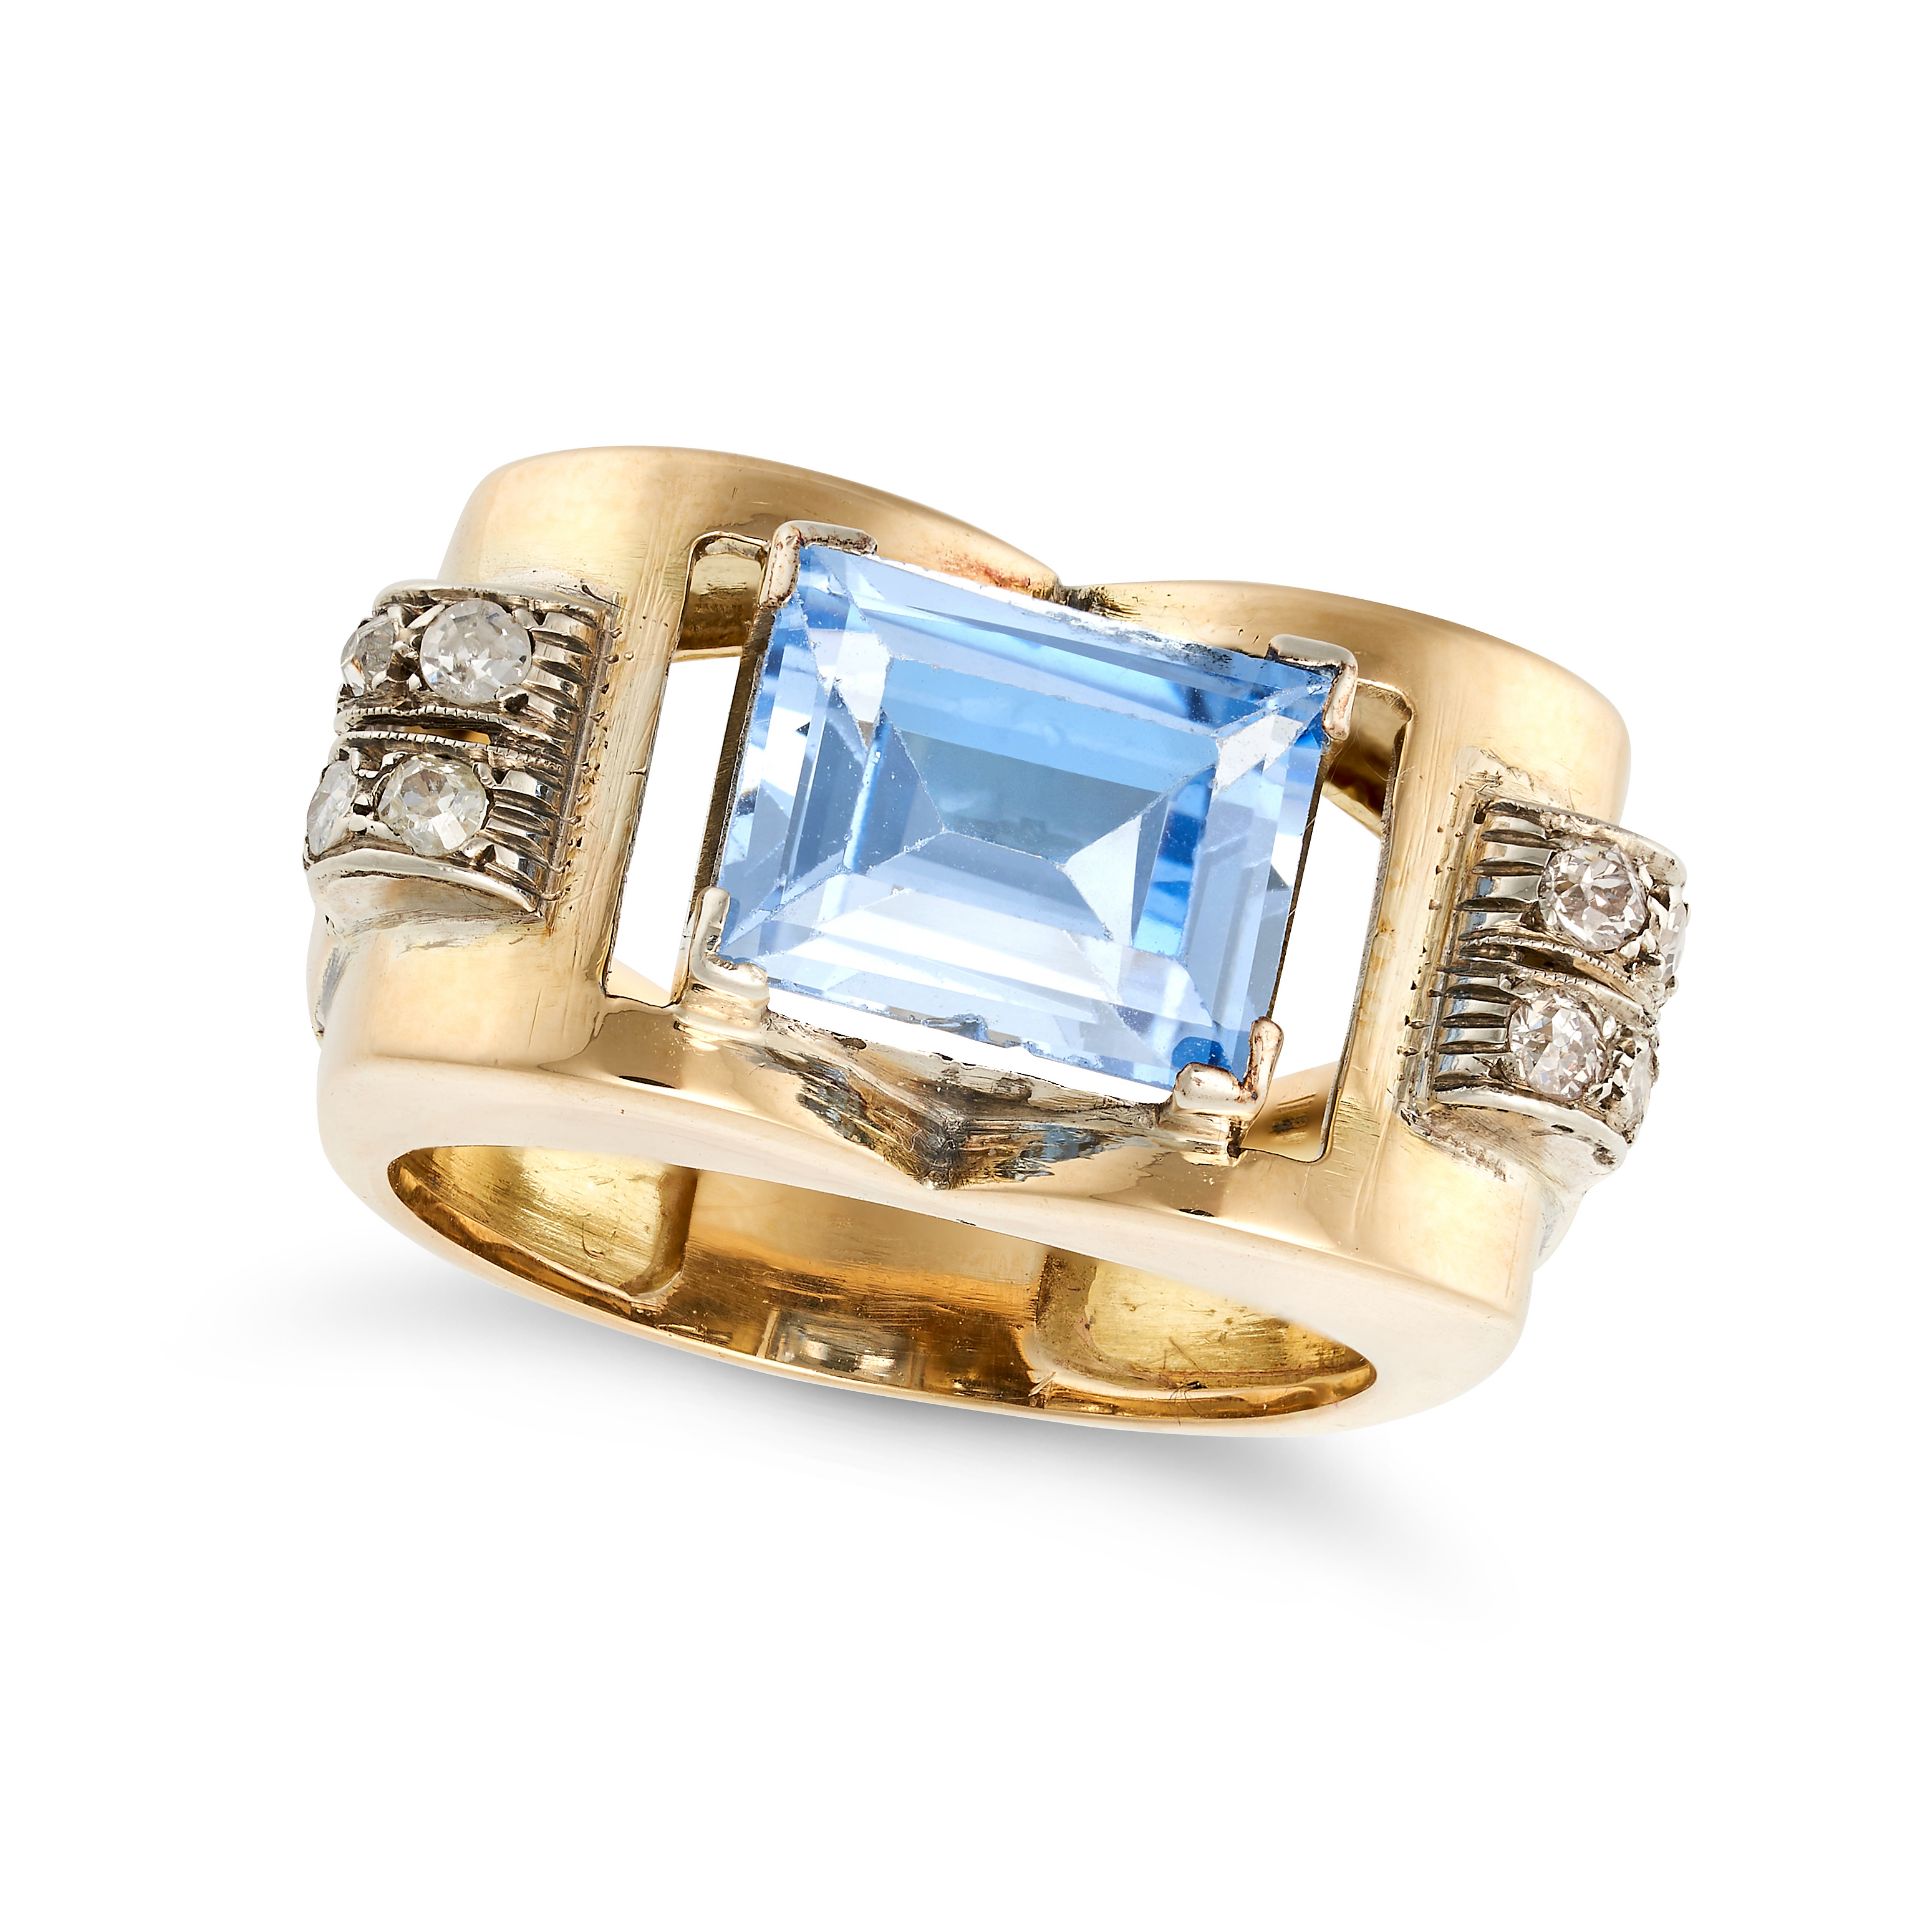 A RETRO SYNTHETIC SPINEL AND DIAMOND RING in yellow gold, set with a rectangular step cut blue sy...